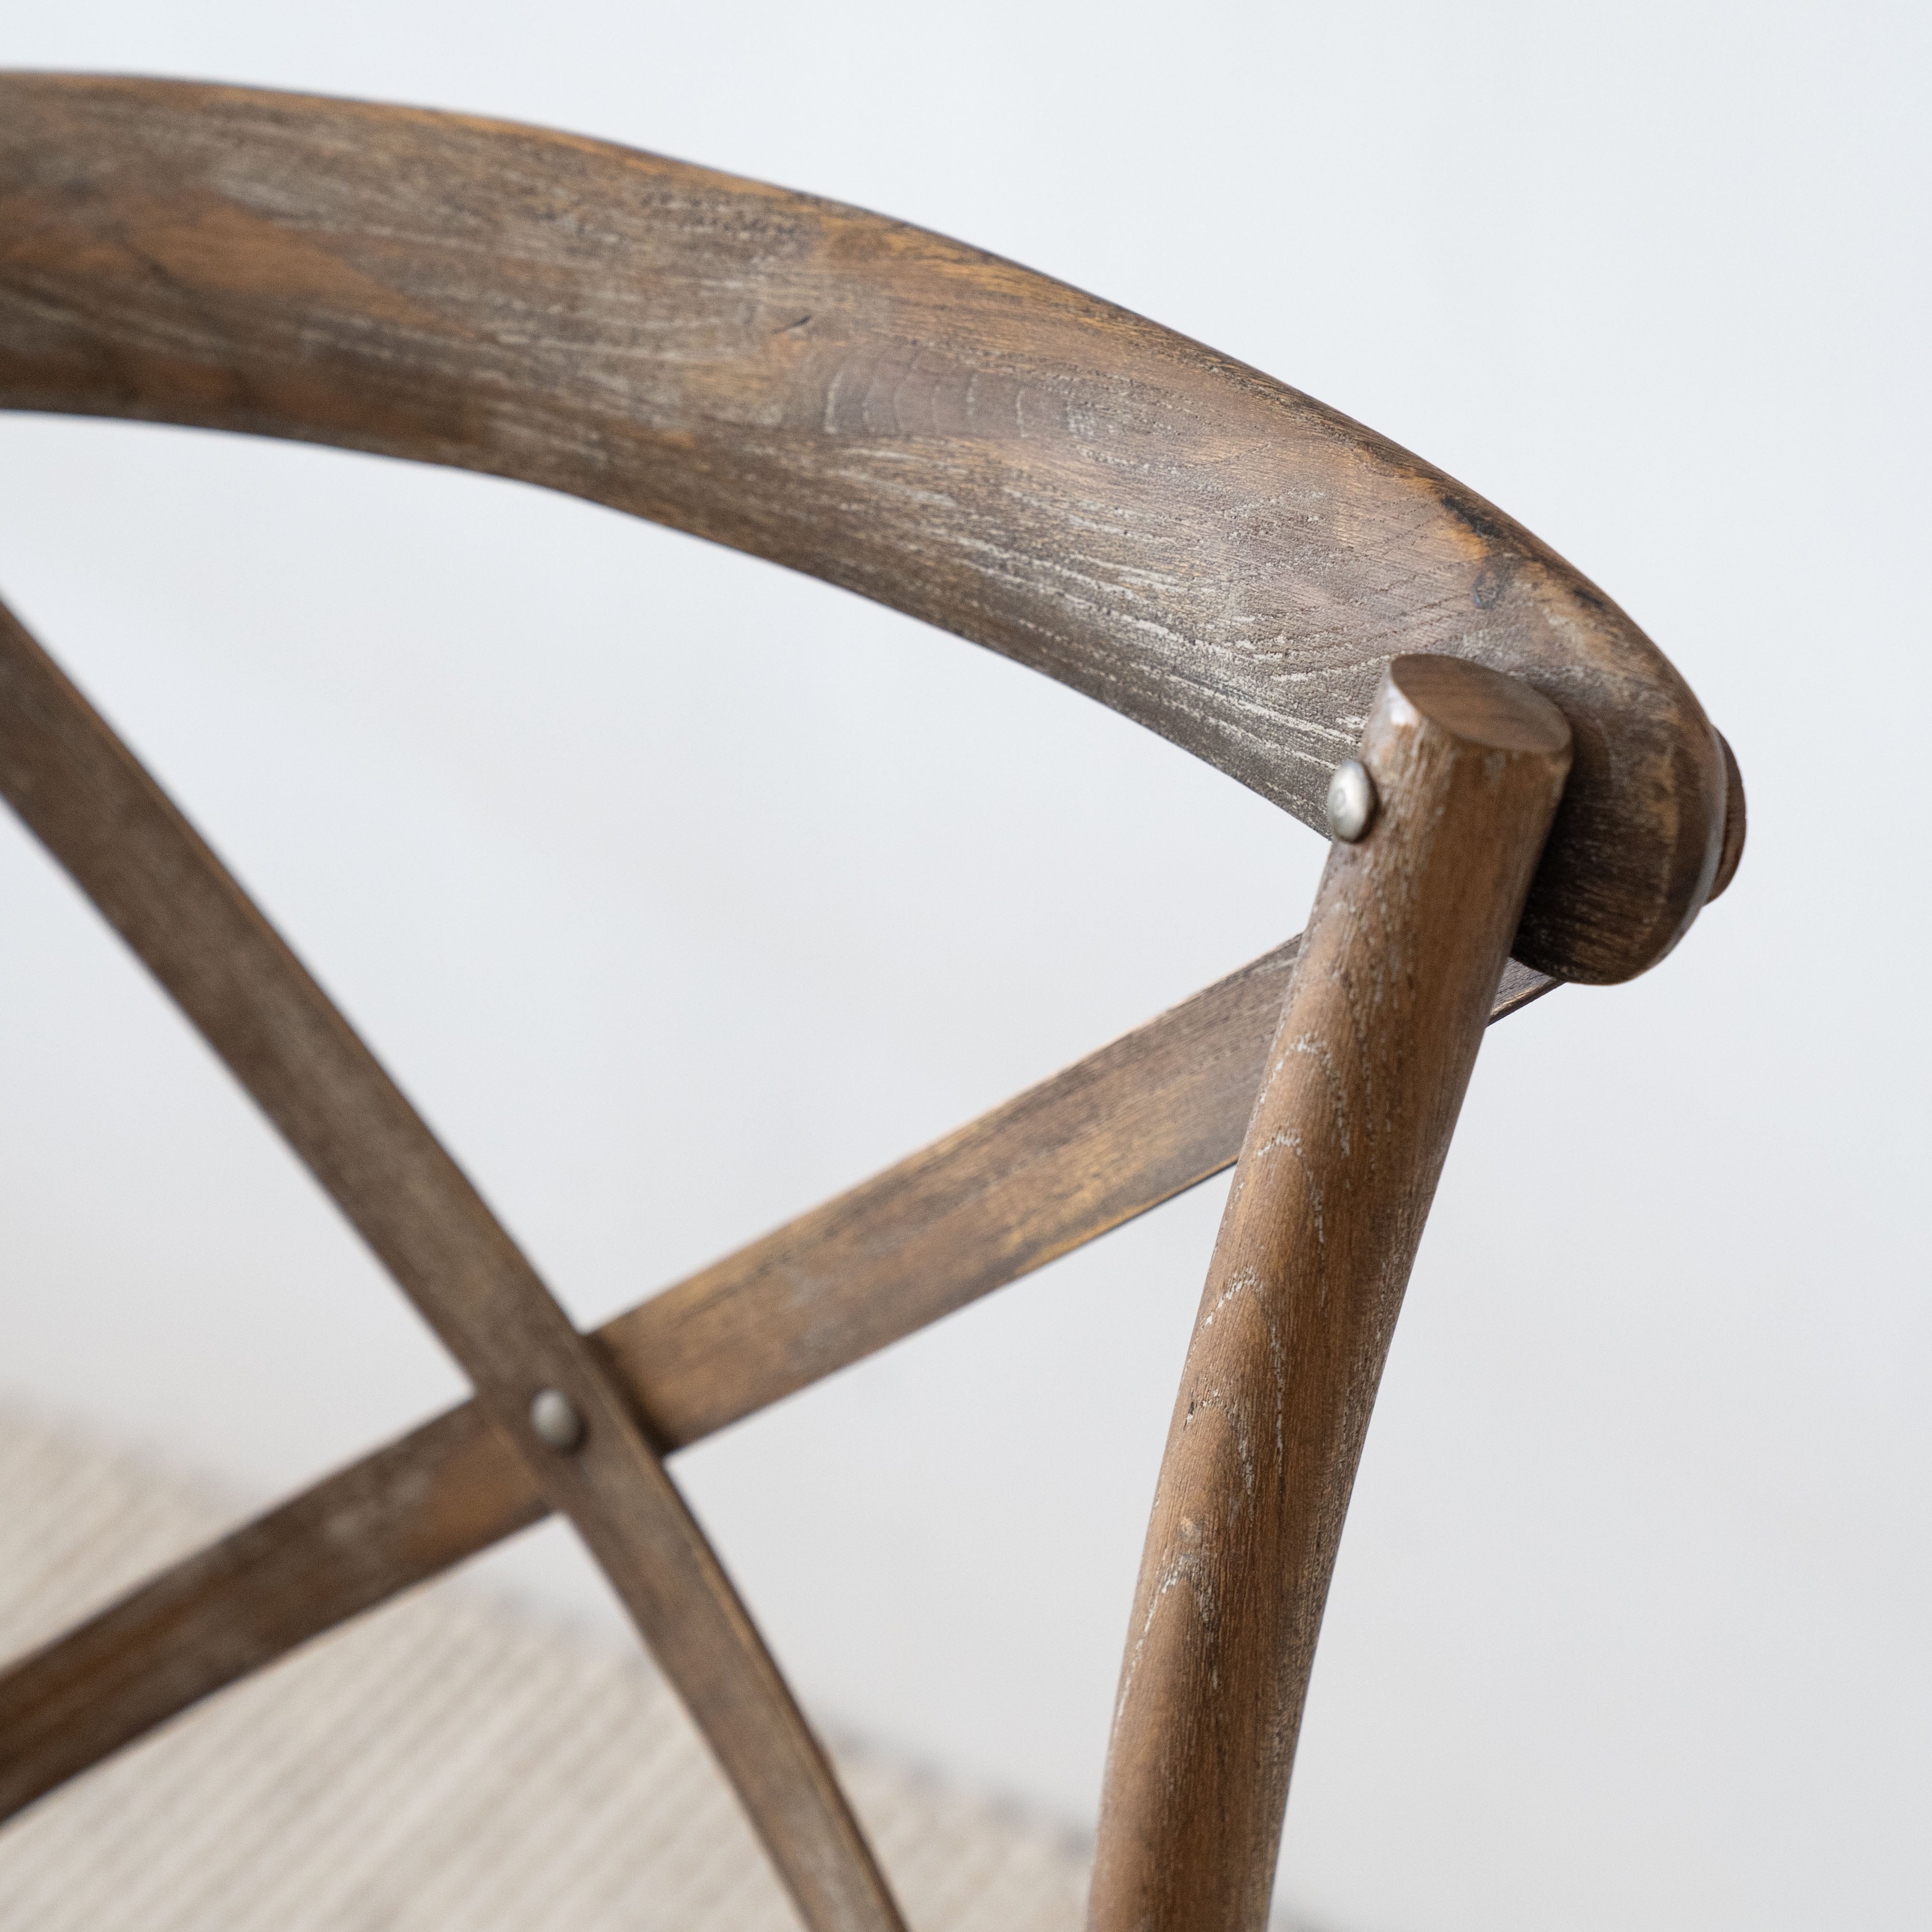 Montaouk Chair - Dark - Wood and Steel Furnitures